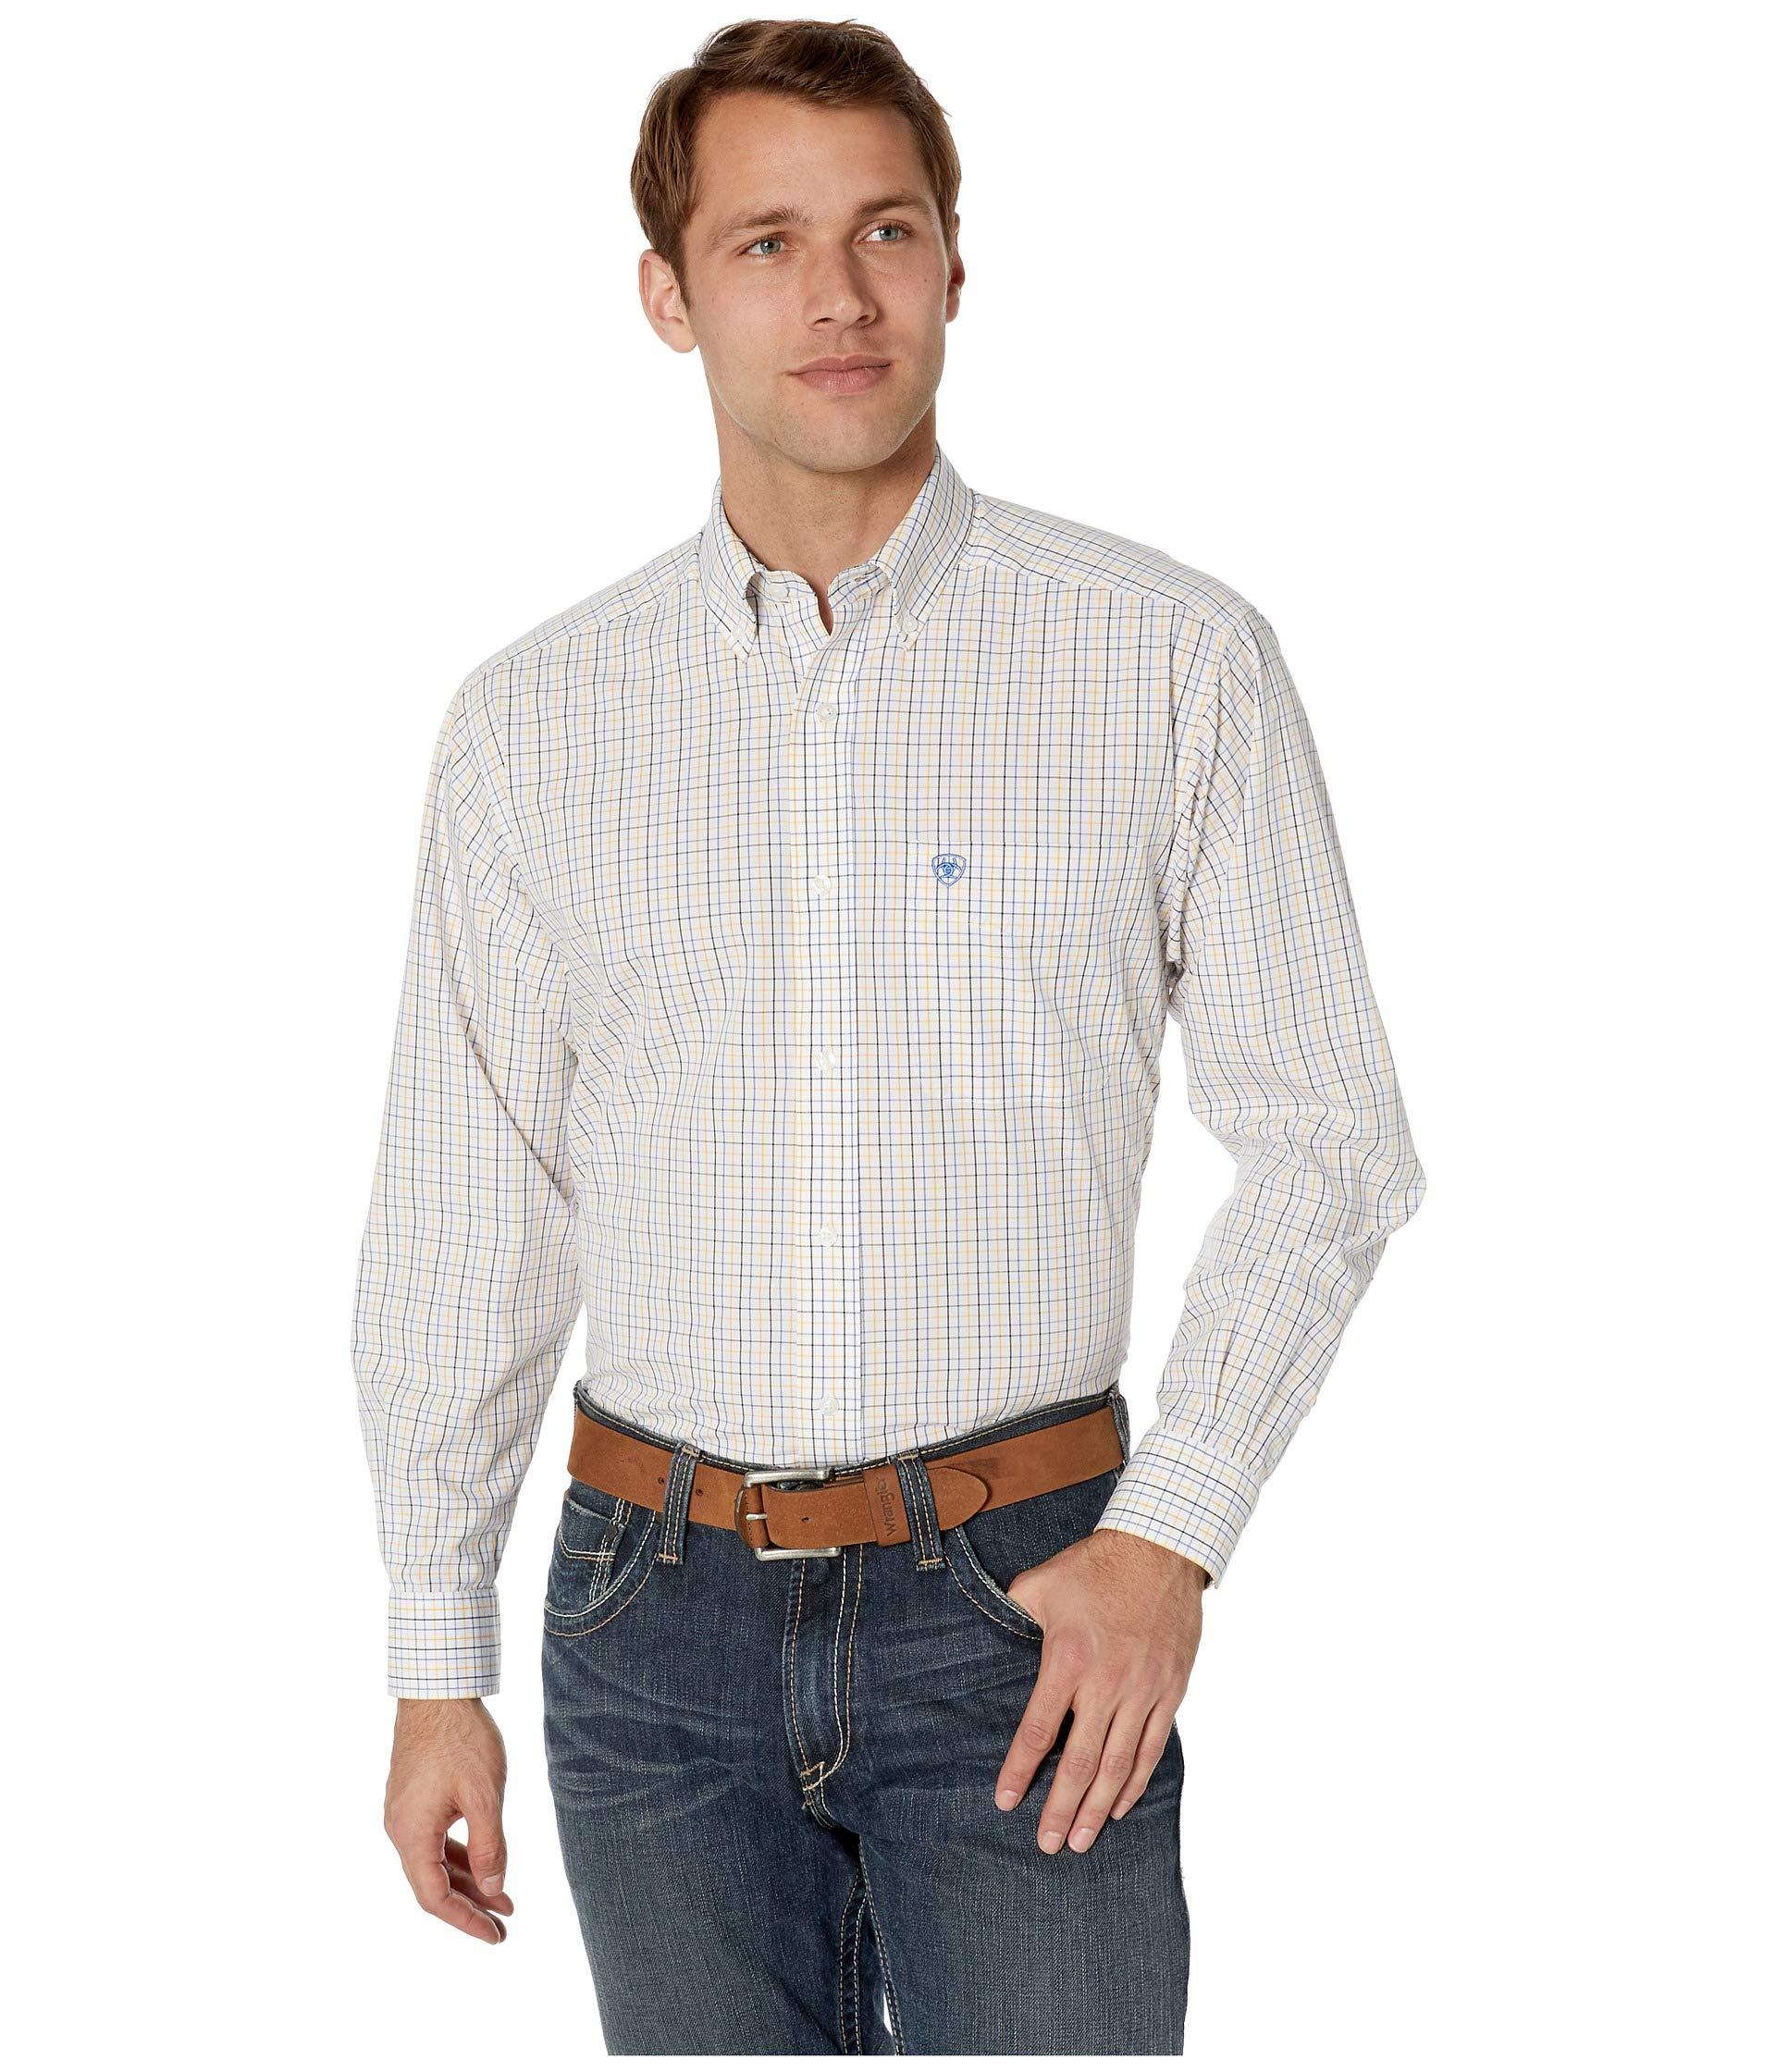 Lyst - Ariat Wrinkle Free Ludlow Shirt (white) Men's Long Sleeve Button ...